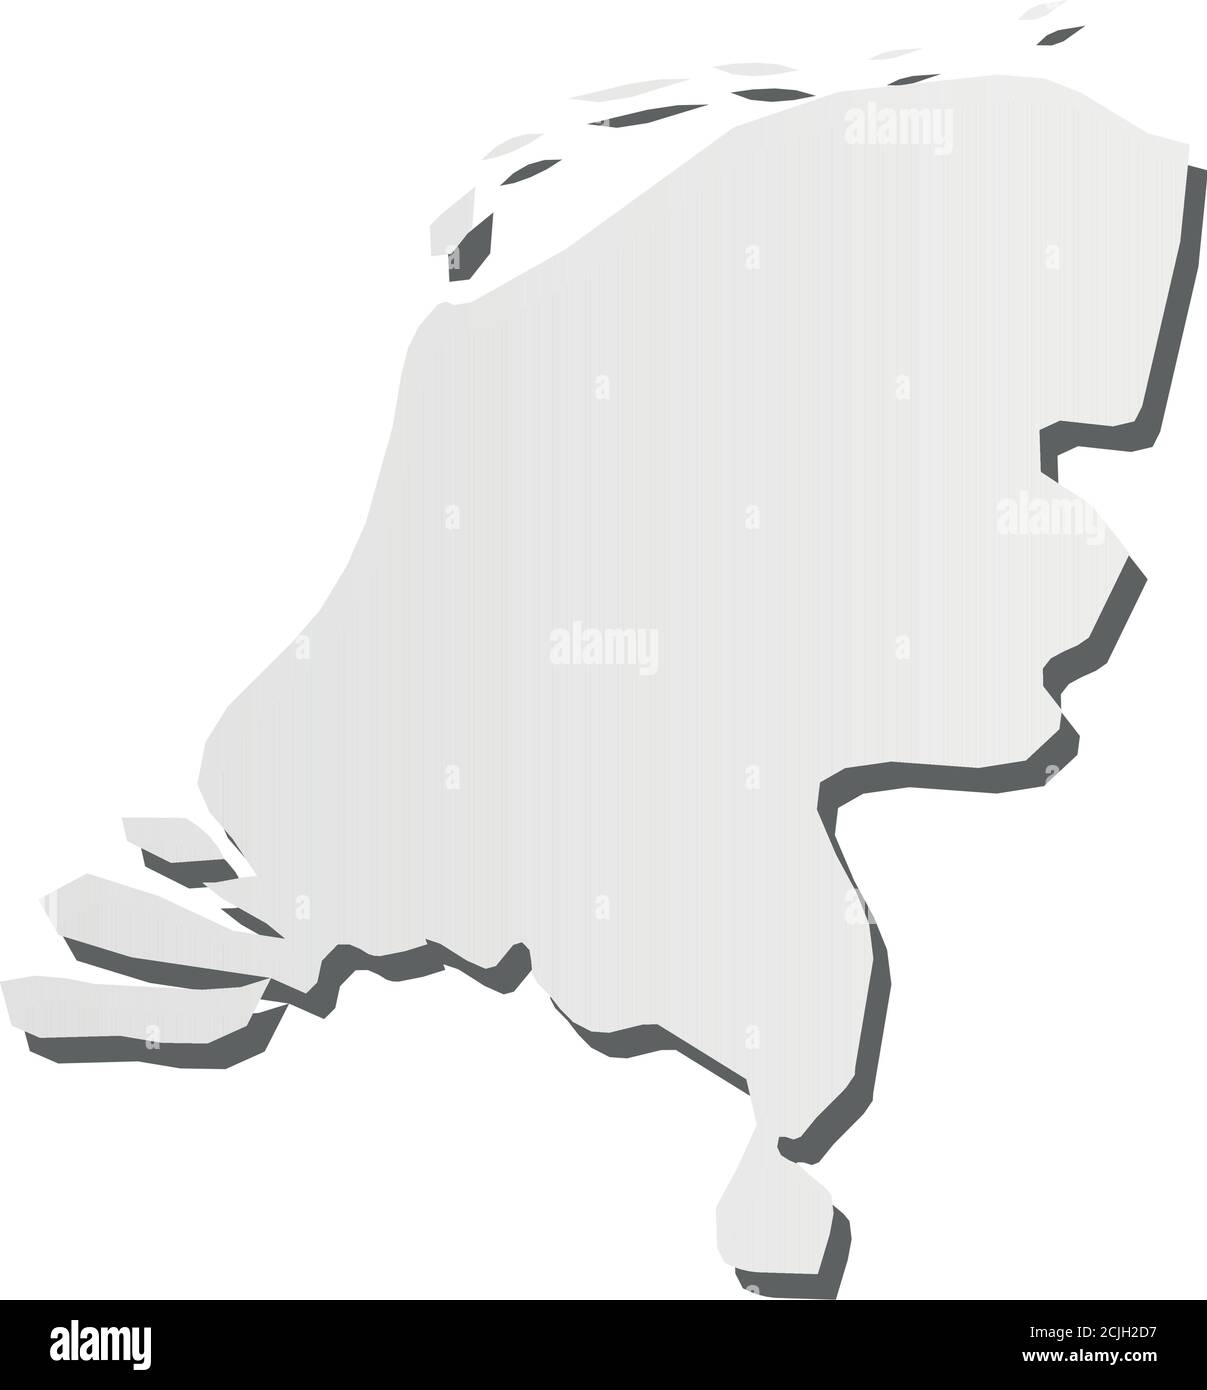 Netherlands, Holland - grey 3d-like silhouette map of country area with dropped shadow. Simple flat vector illustration. Stock Vector